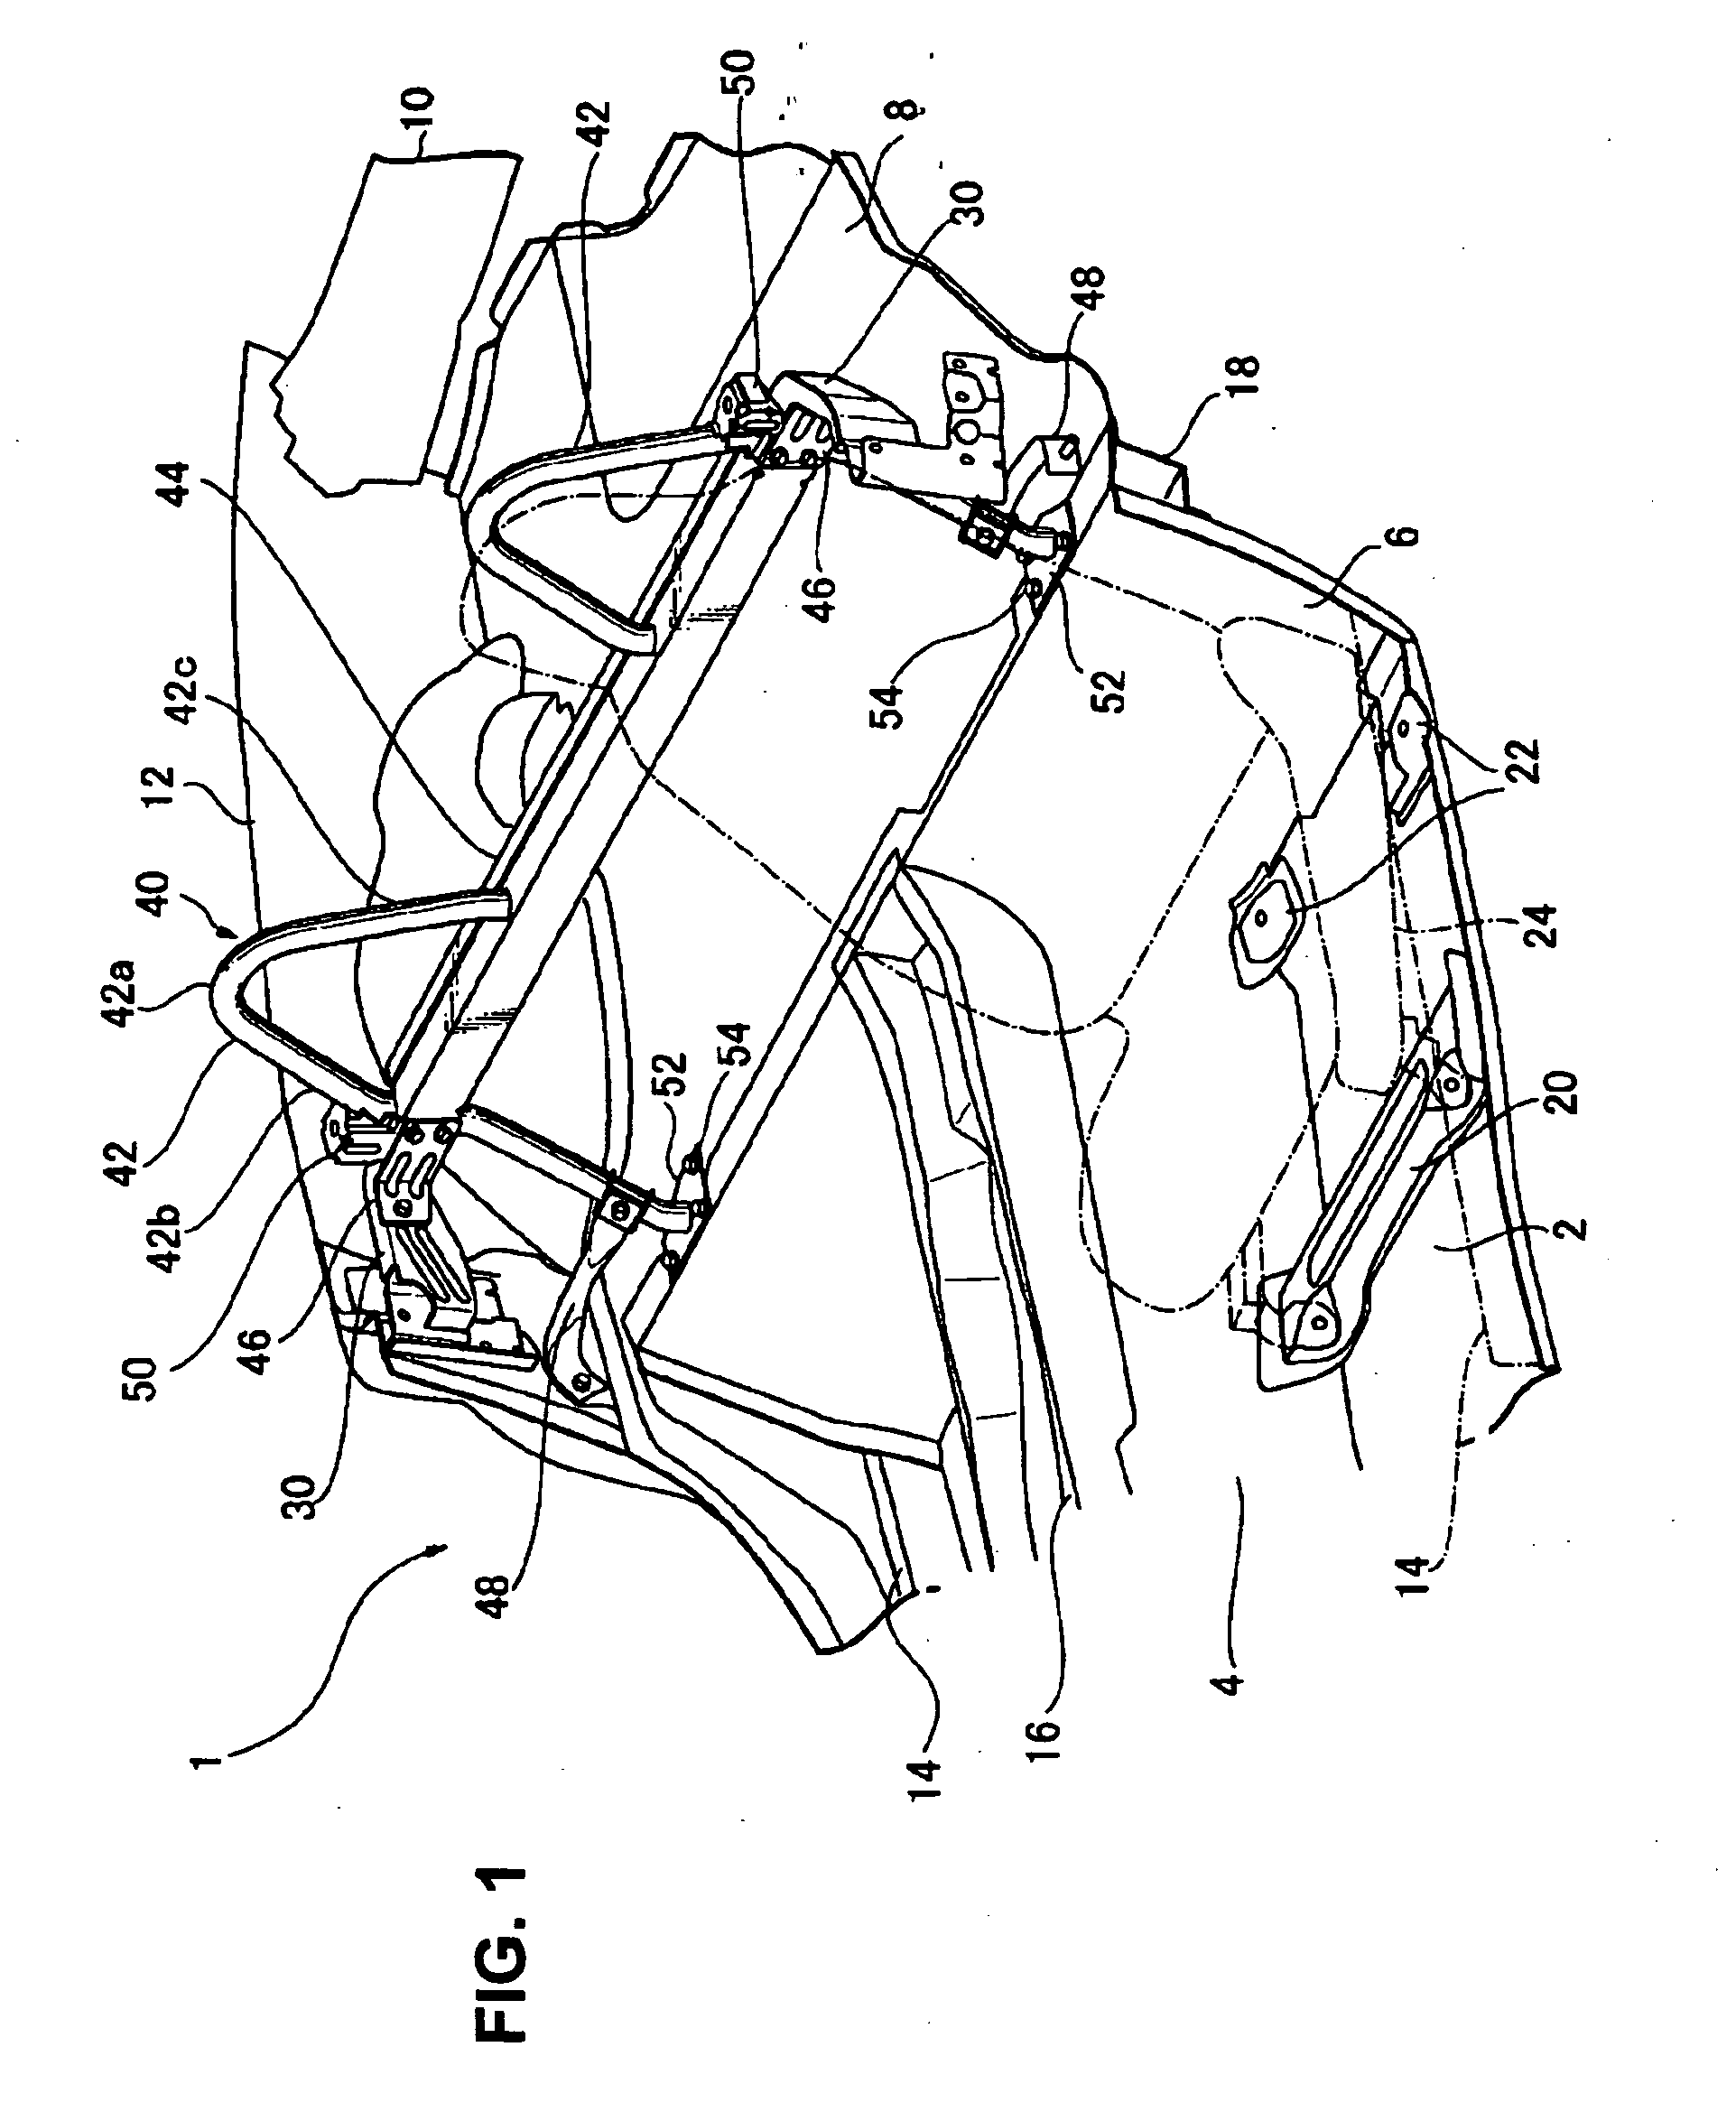 Roll bar structure of vehicle